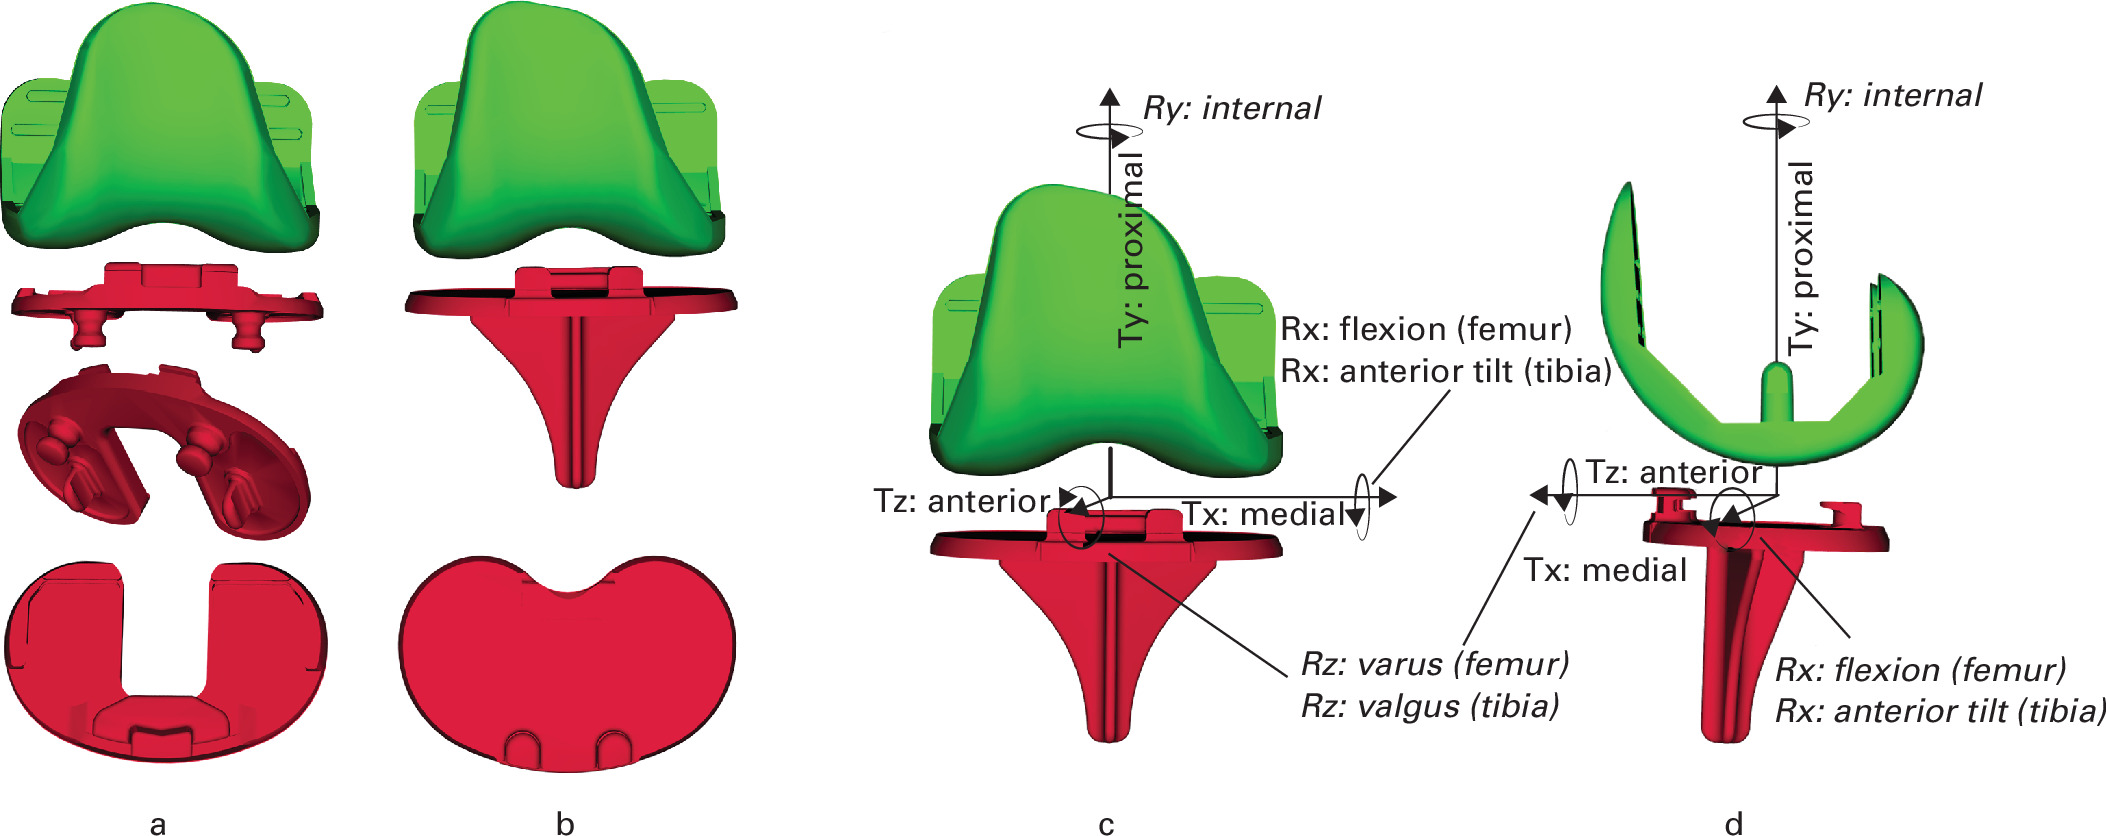 Fig. 1 
          Implant geometry of the a) Vanguard XP (bicruciate-retaining (BCR)) and b) Vanguard CR (cruciate-retaining (CR)). c) Frontal and d) sagittal orientation of the longitudinal, transverse, and sagittal axes and the directions of positive translation and rotation (in italics) for both the femur and tibia componenta.
        